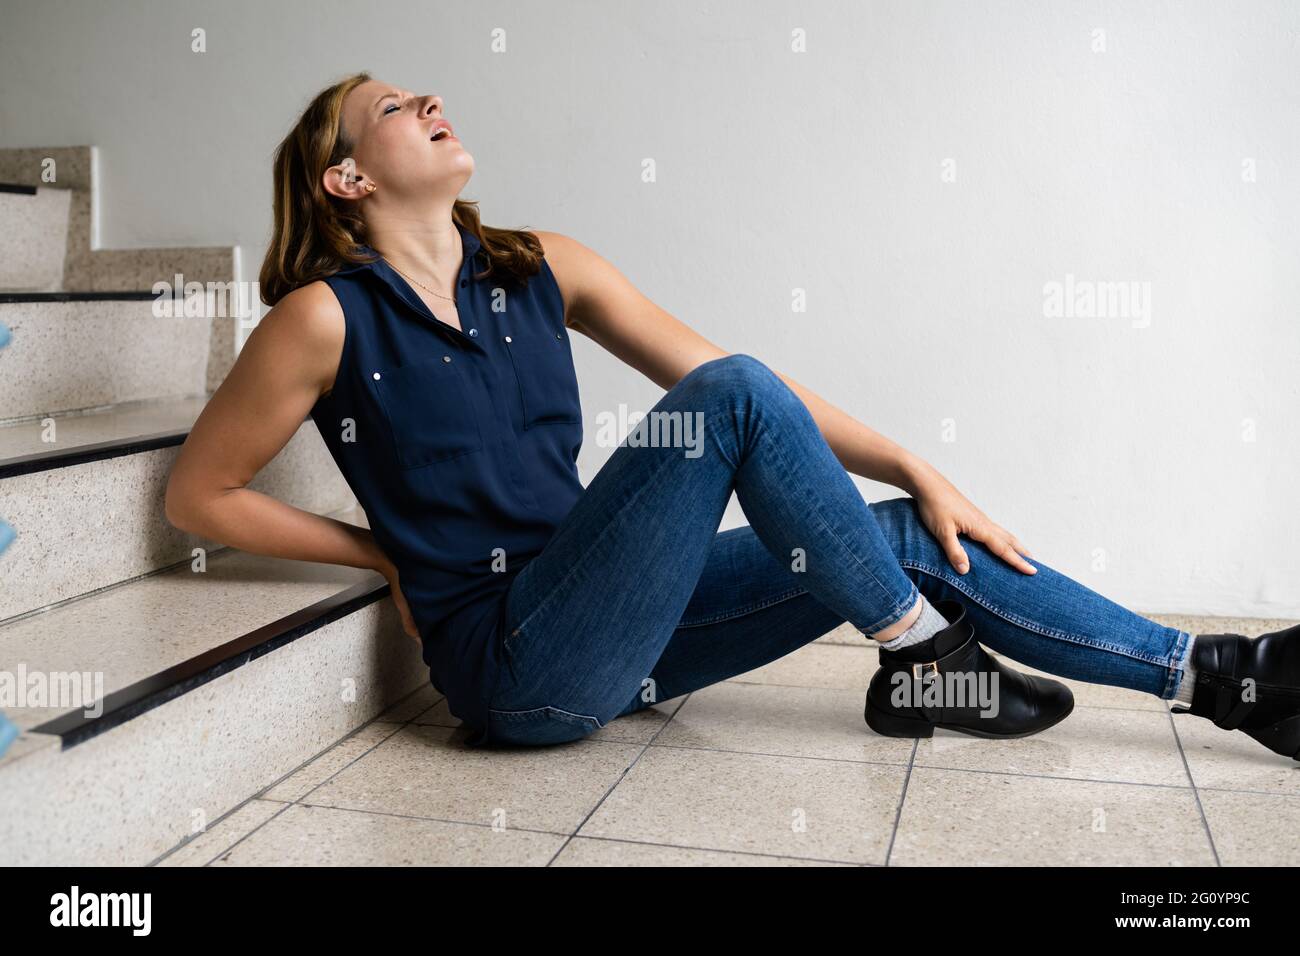 Slip And Fall Down Stairs Injury Accident At Workplace Stock Photo